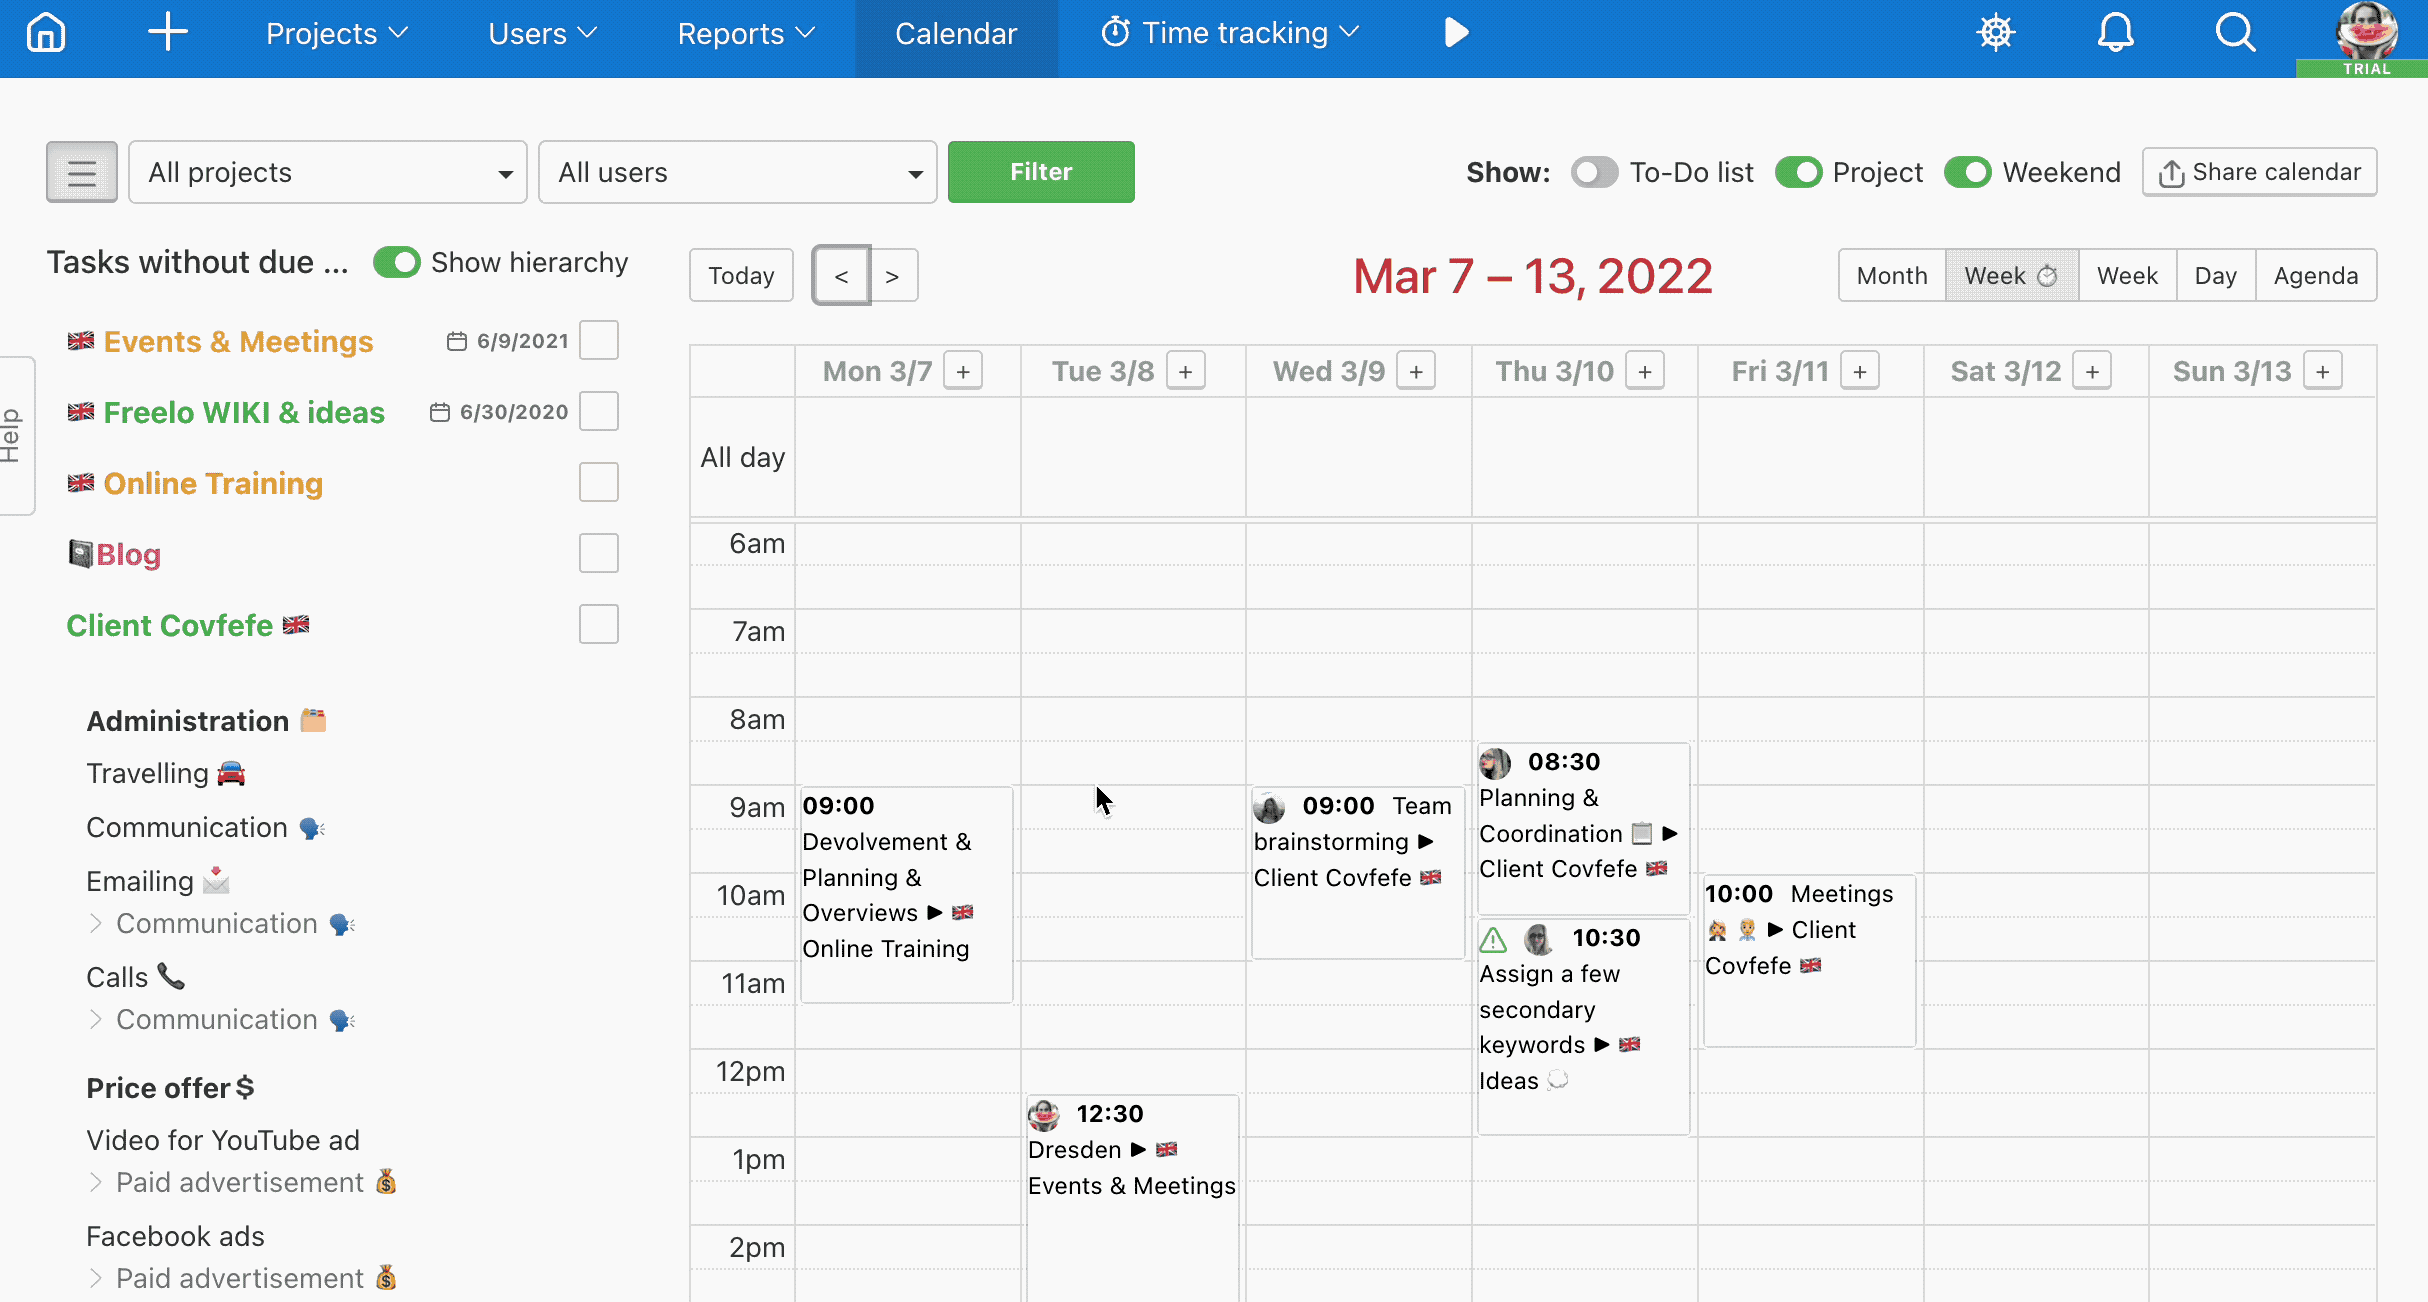 Example how to add a new task in the Calendar.